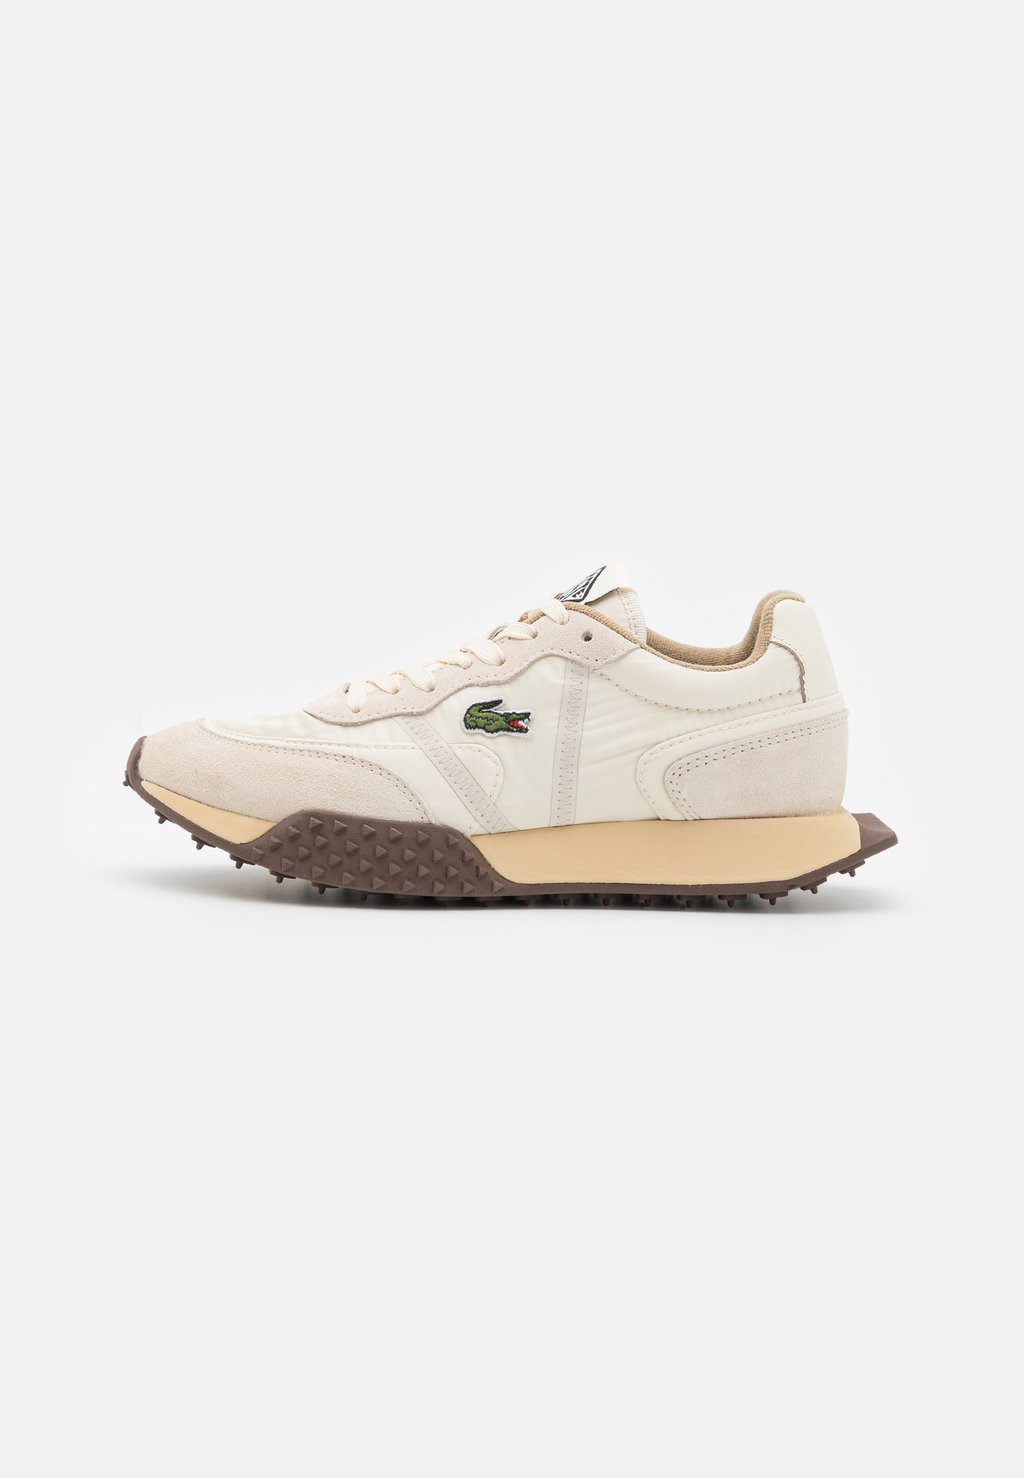 Кроссовки Lacoste L-SPIN DELUXE 3.0, цвет off white кроссовки lacoste run spin eco black off white